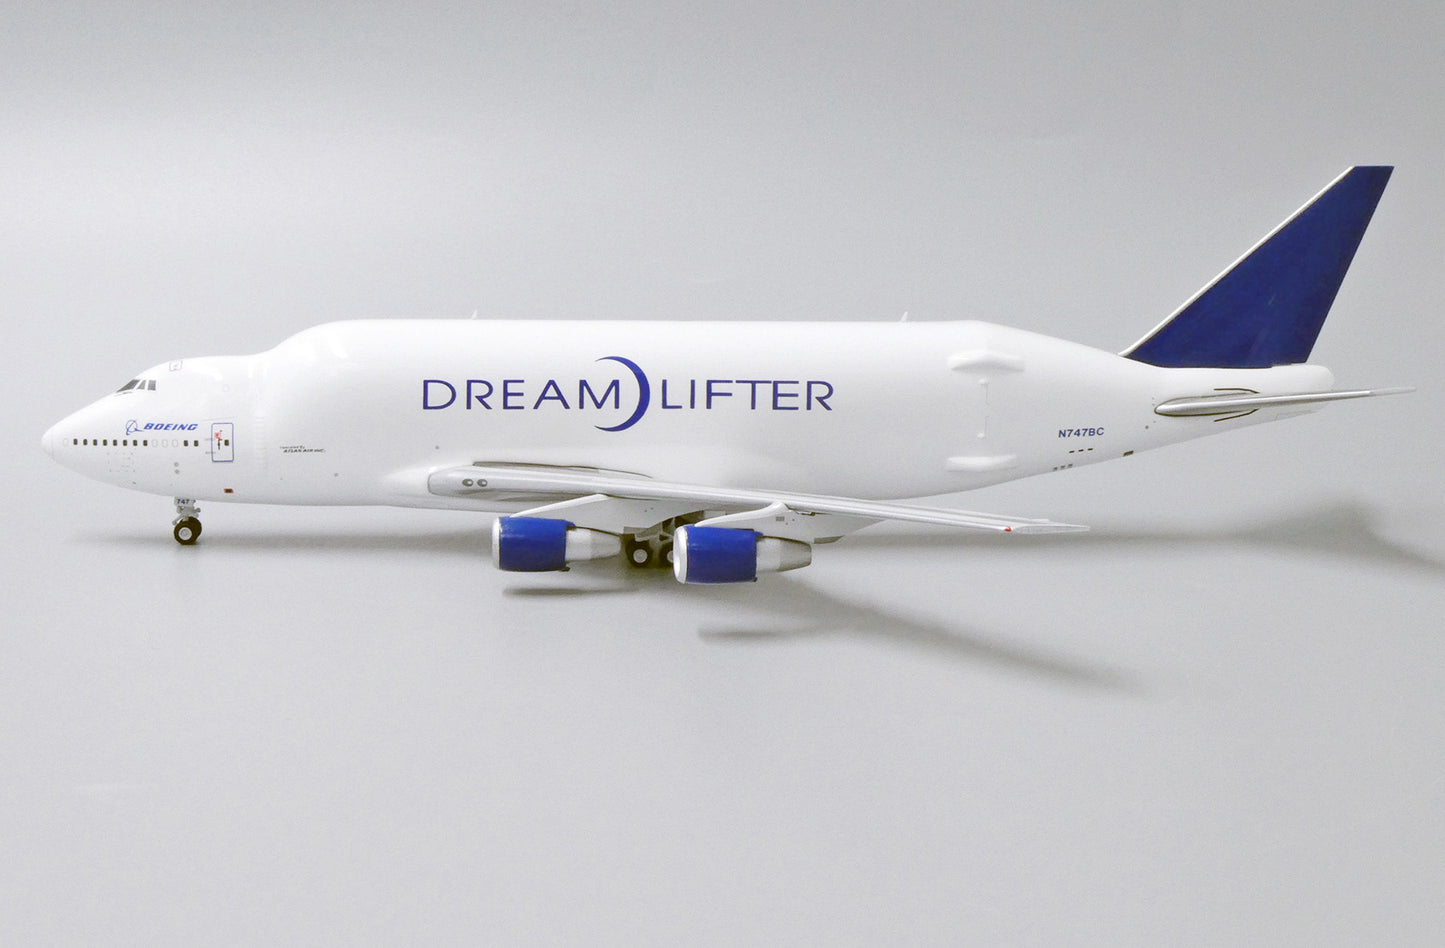 1:400 JC Wings Boeing Company 747-400 (LCF) Dreamlifter "FLAPS DOWN" N747BC LH4174A